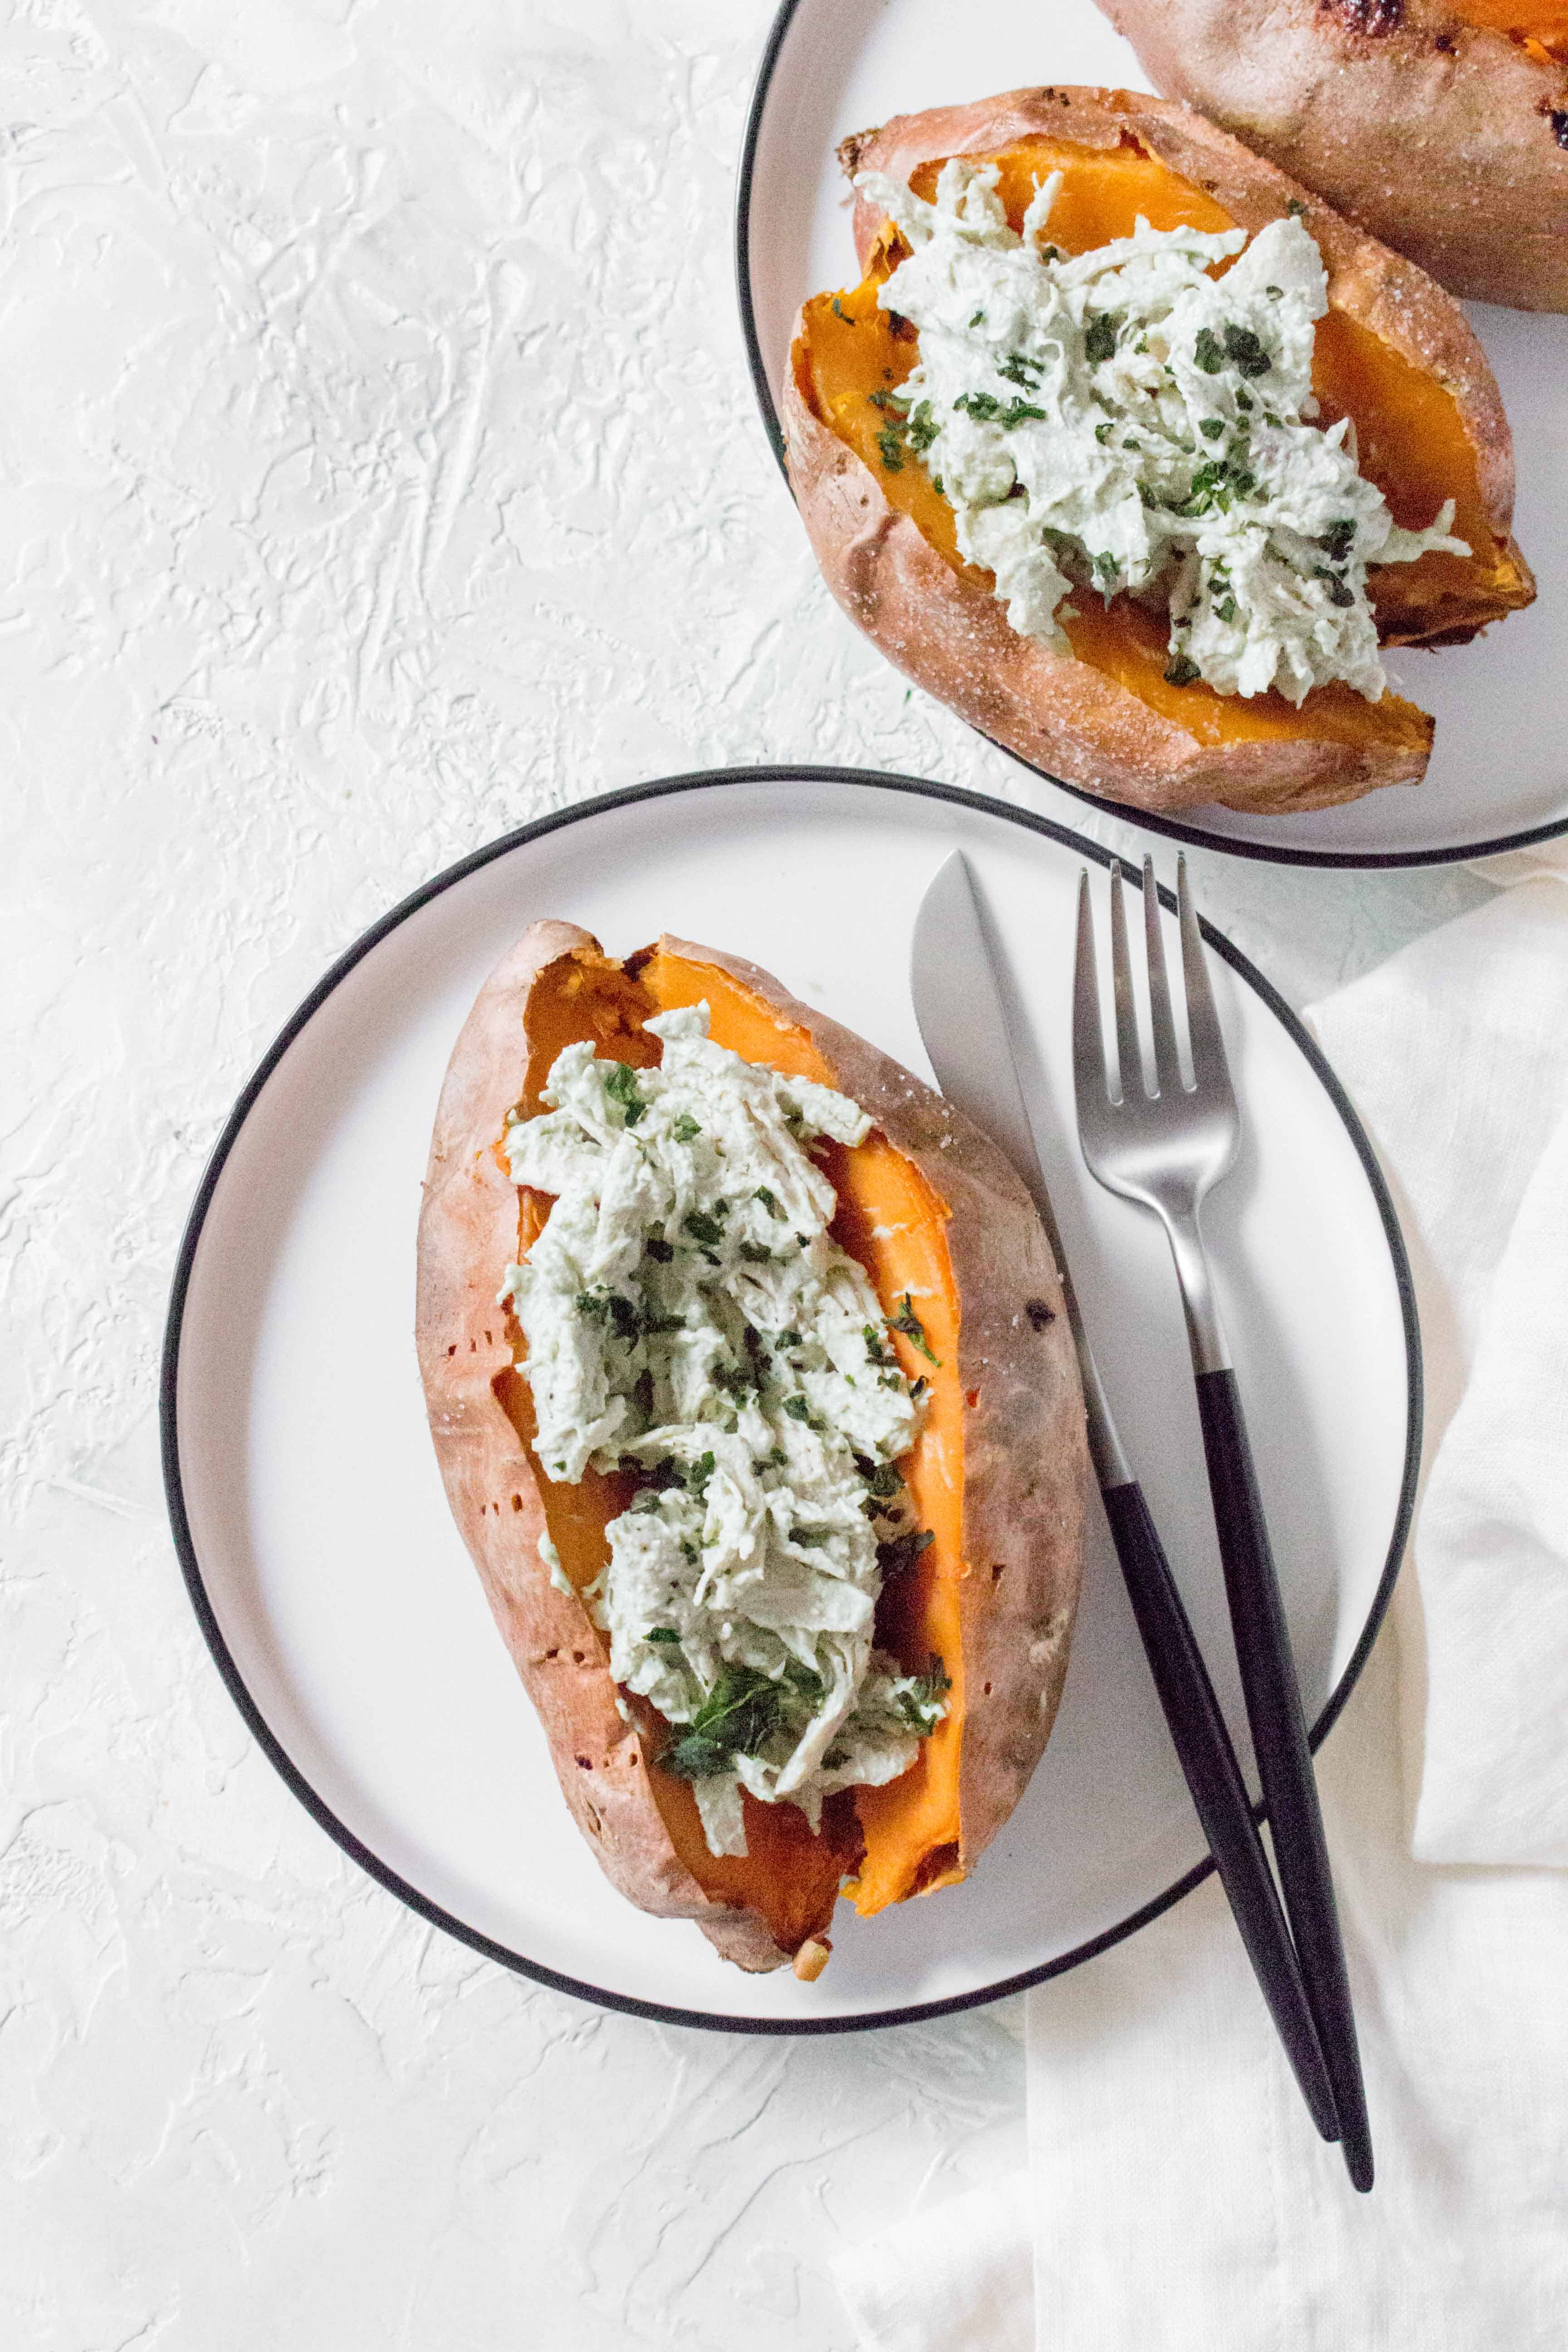 This Chicken Stuffed Sweet Potatoes are an easy and healthy weeknight dinner recipe the whole family will enjoy! Plus it can be easily turned into a meal prep for the week.